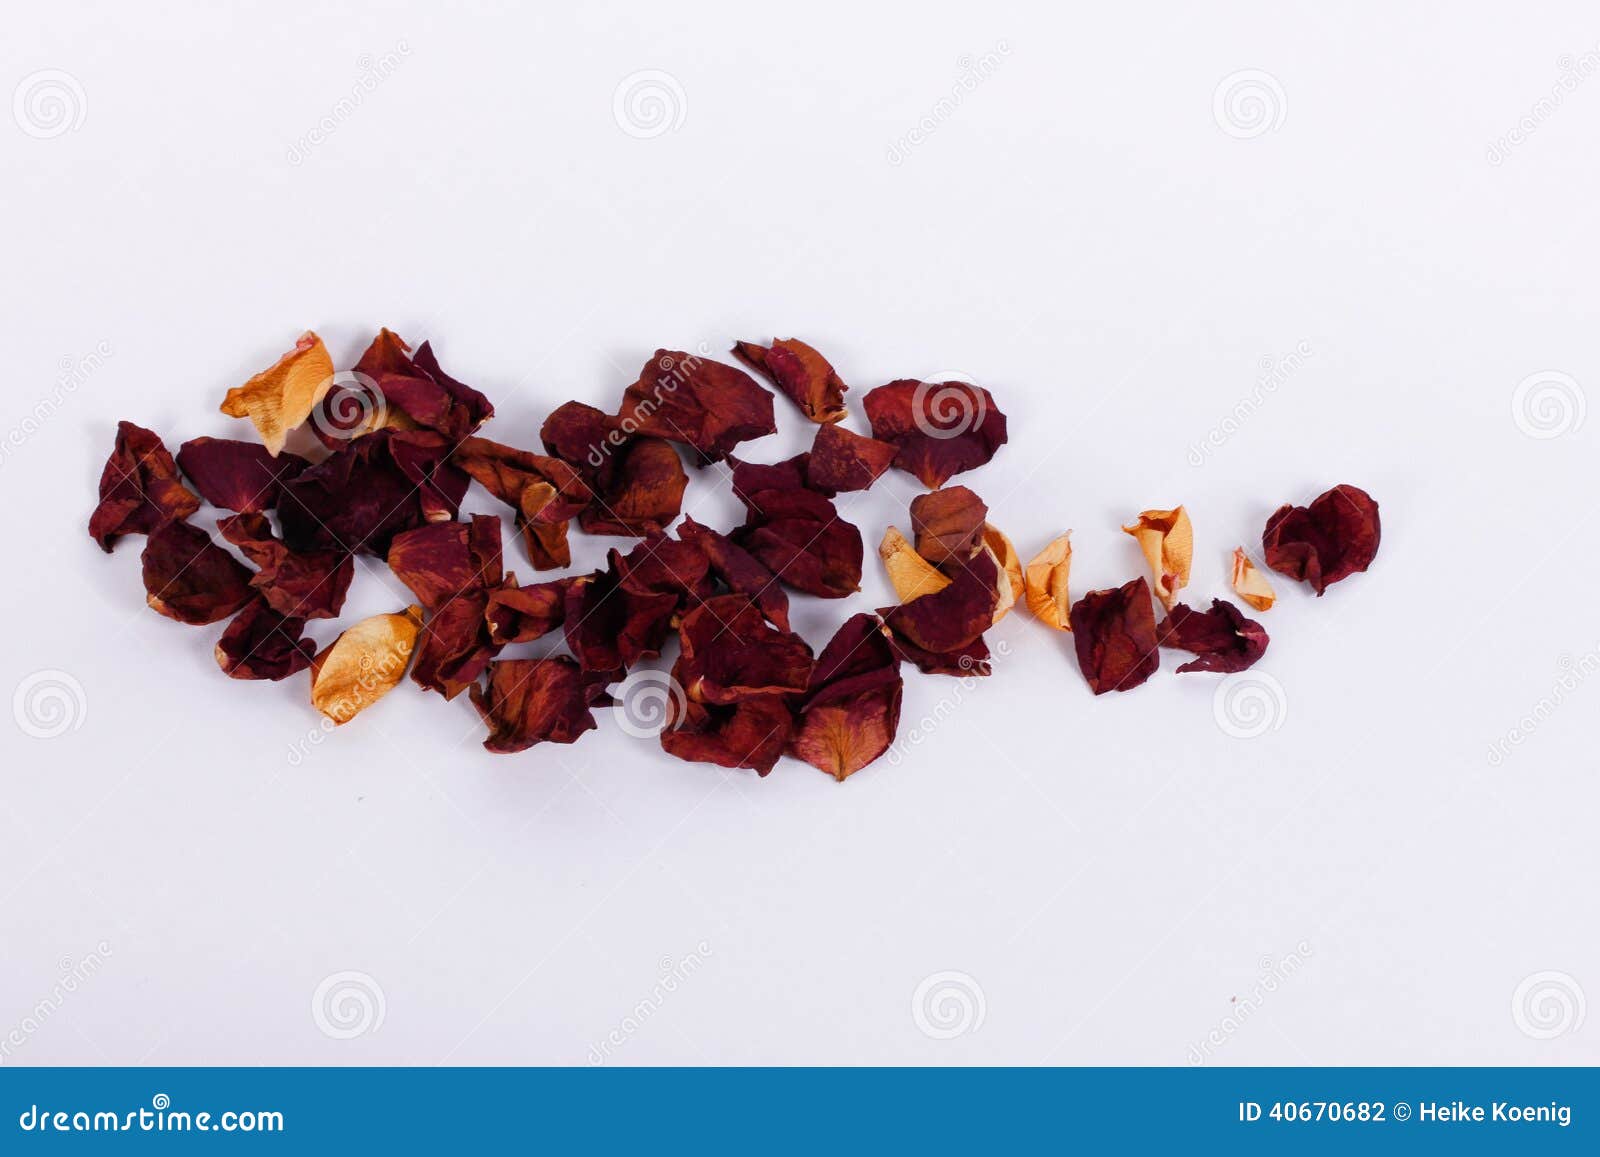 1,400+ Dry Rose Petals Stock Photos, Pictures & Royalty-Free